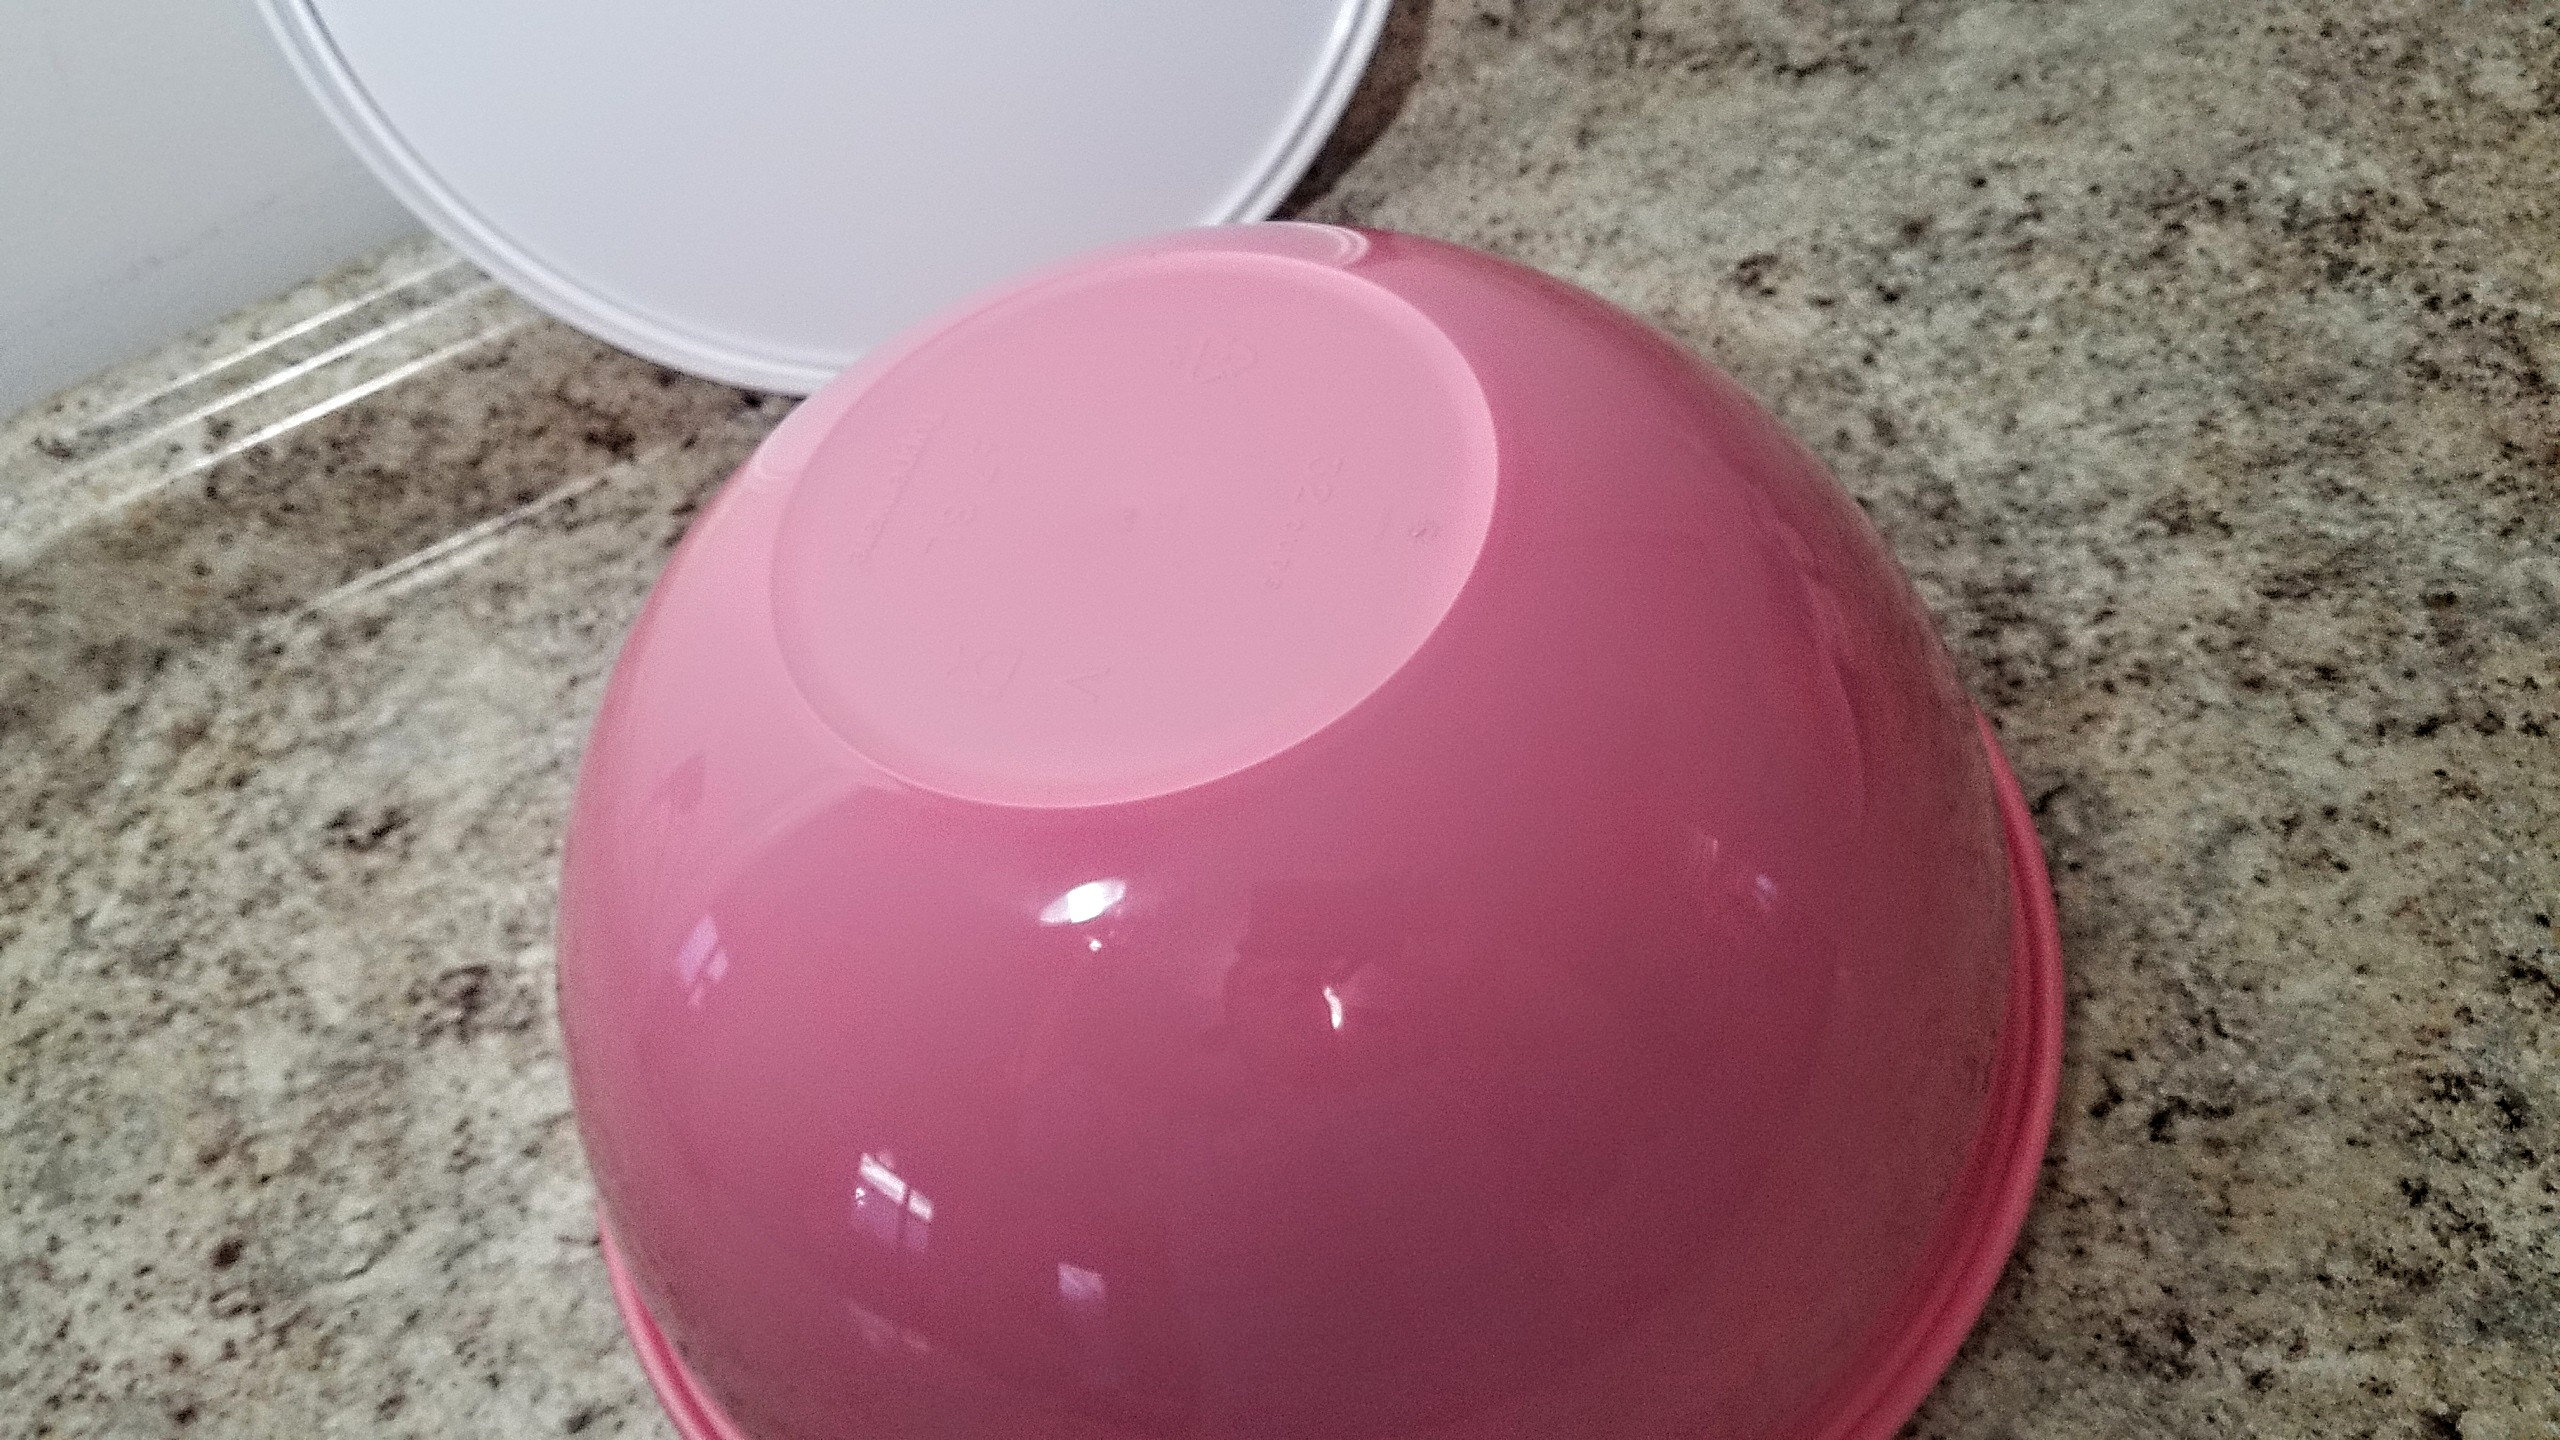 Tupperware Super Large White 32 Cup Thatsa Bowl Container W/Pink Lid